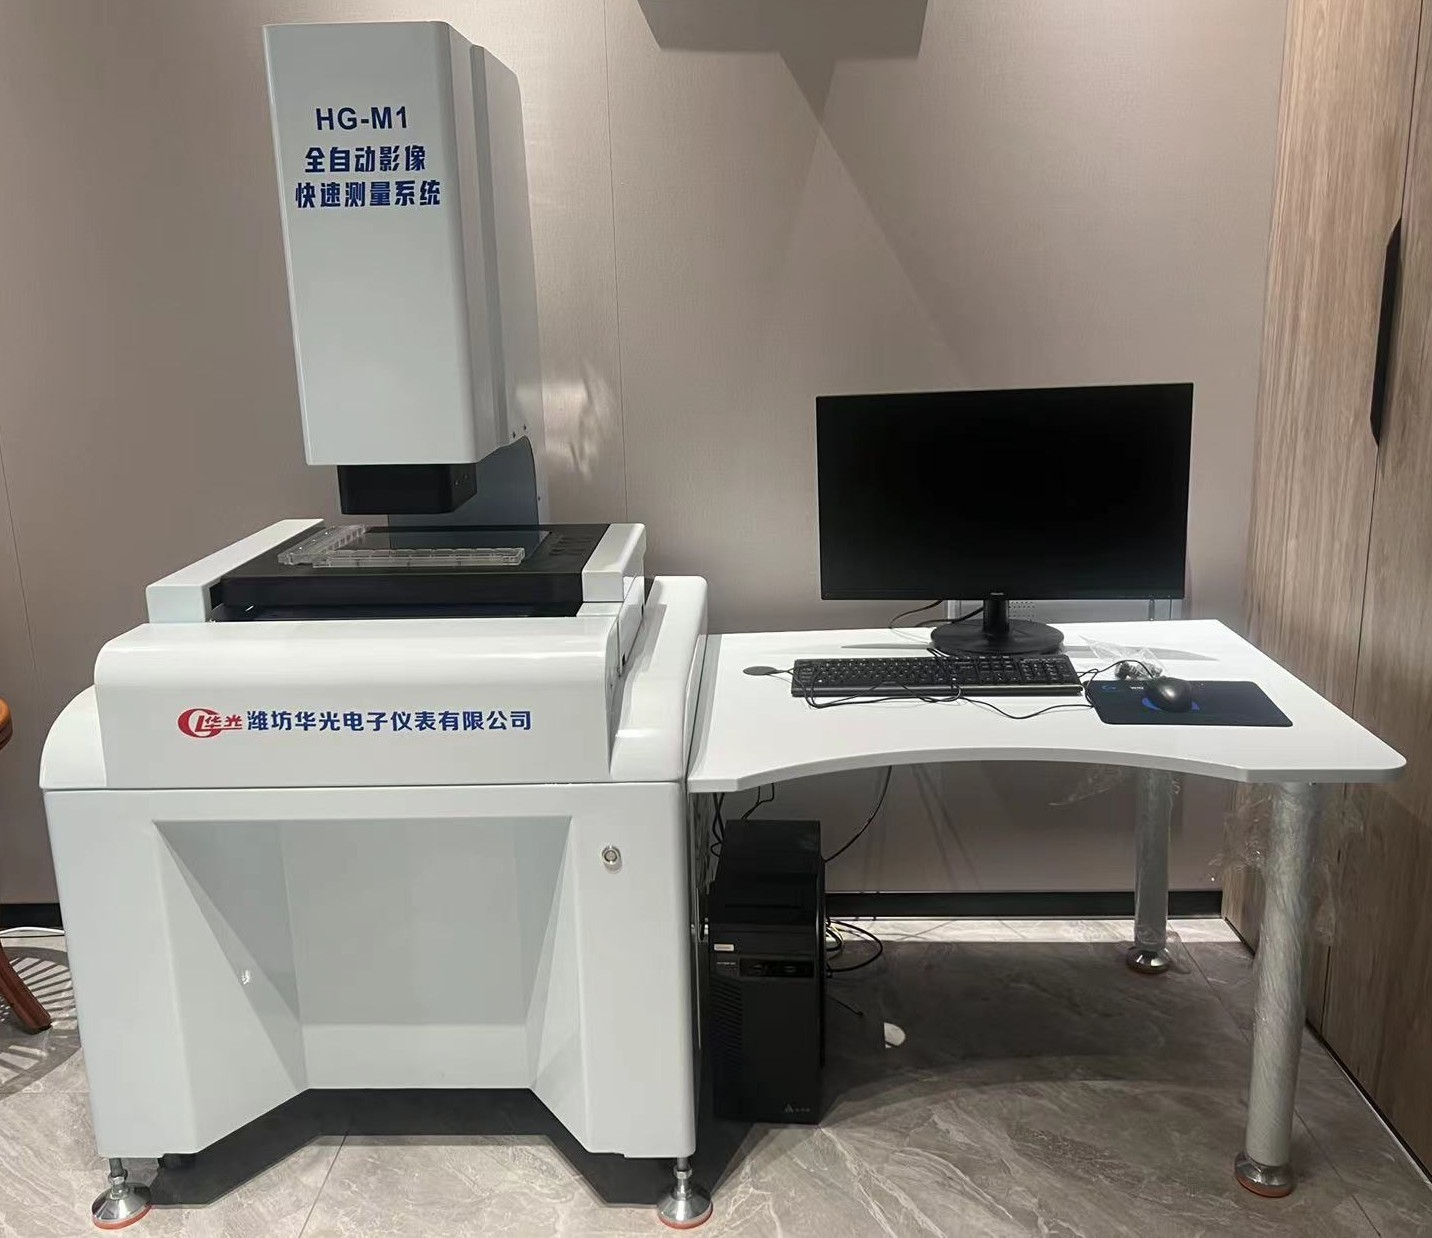 [Huaguang] Fully automatic image rapid measurement system for all-round measurement